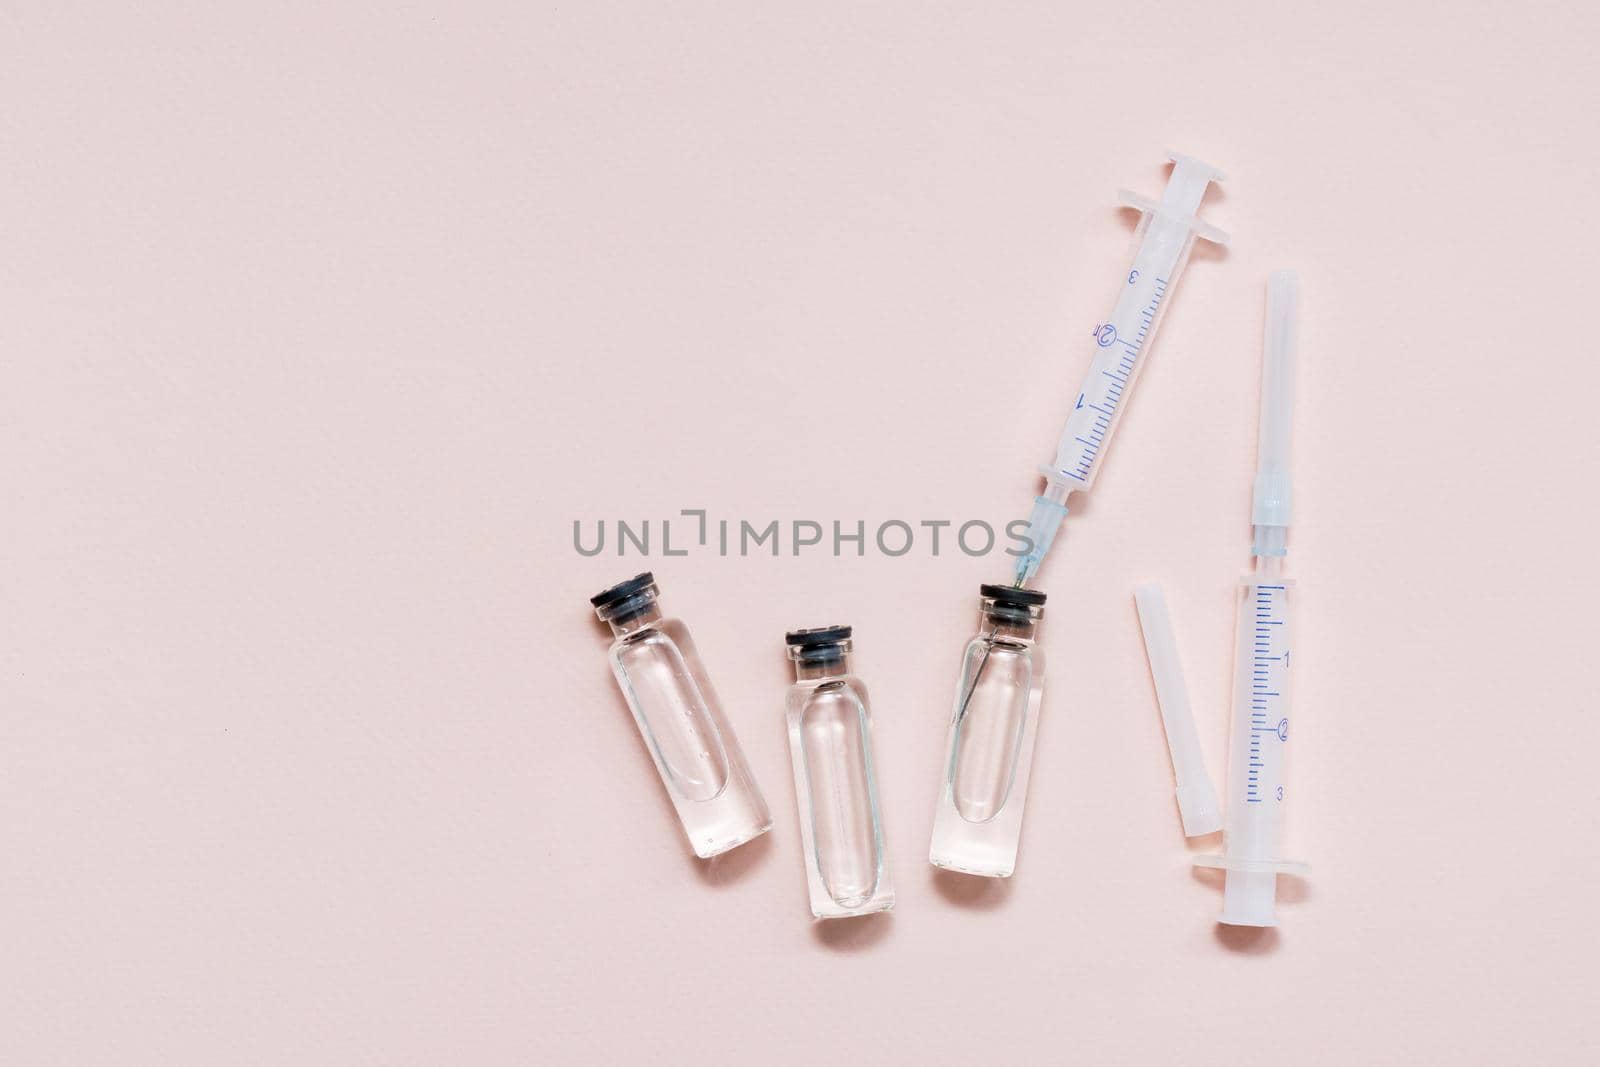 Vaccination and Immunization. Syringe needle inserted into a glass vial with vaccine. Top view